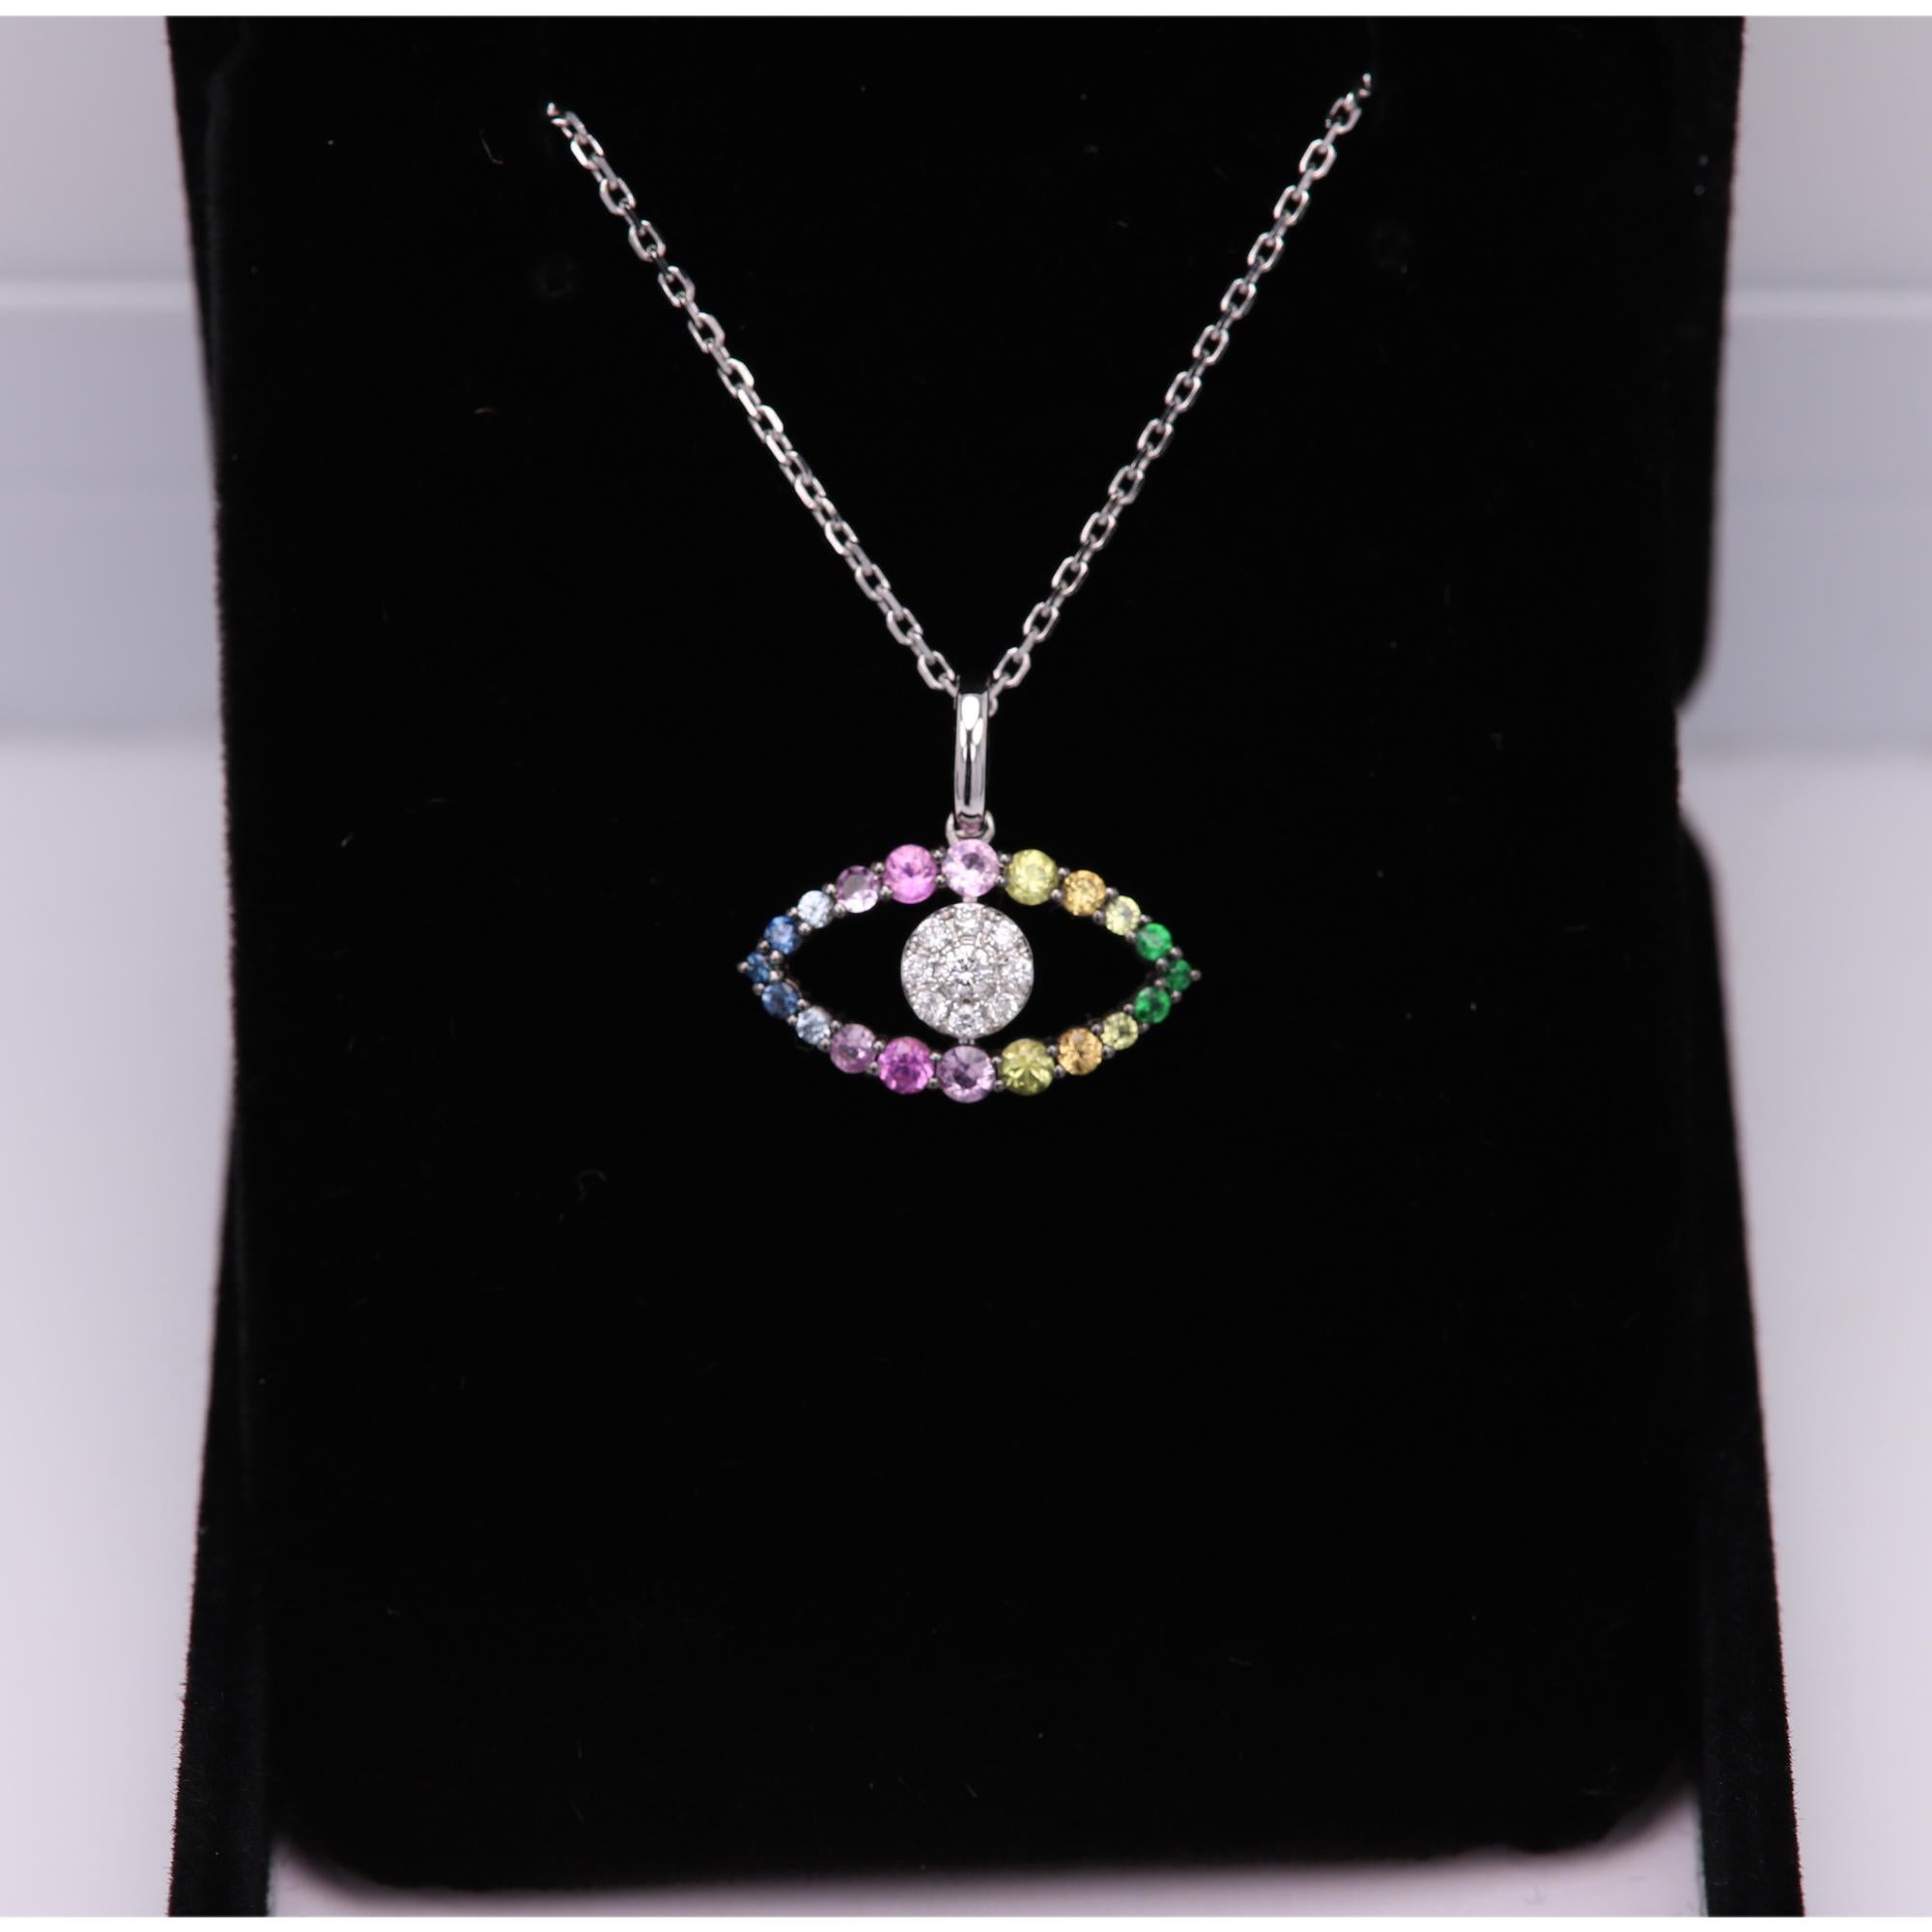 Evil Eye- Eye catching - Good Luck - In real colors and Diamonds
Brilliant - Amazing colors of Natural gemstones.

18k White Gold Plated with Black Rhodium 3.70 grams total weight (with the chain).
Multi Colors of gems semi precious and Sapphires,